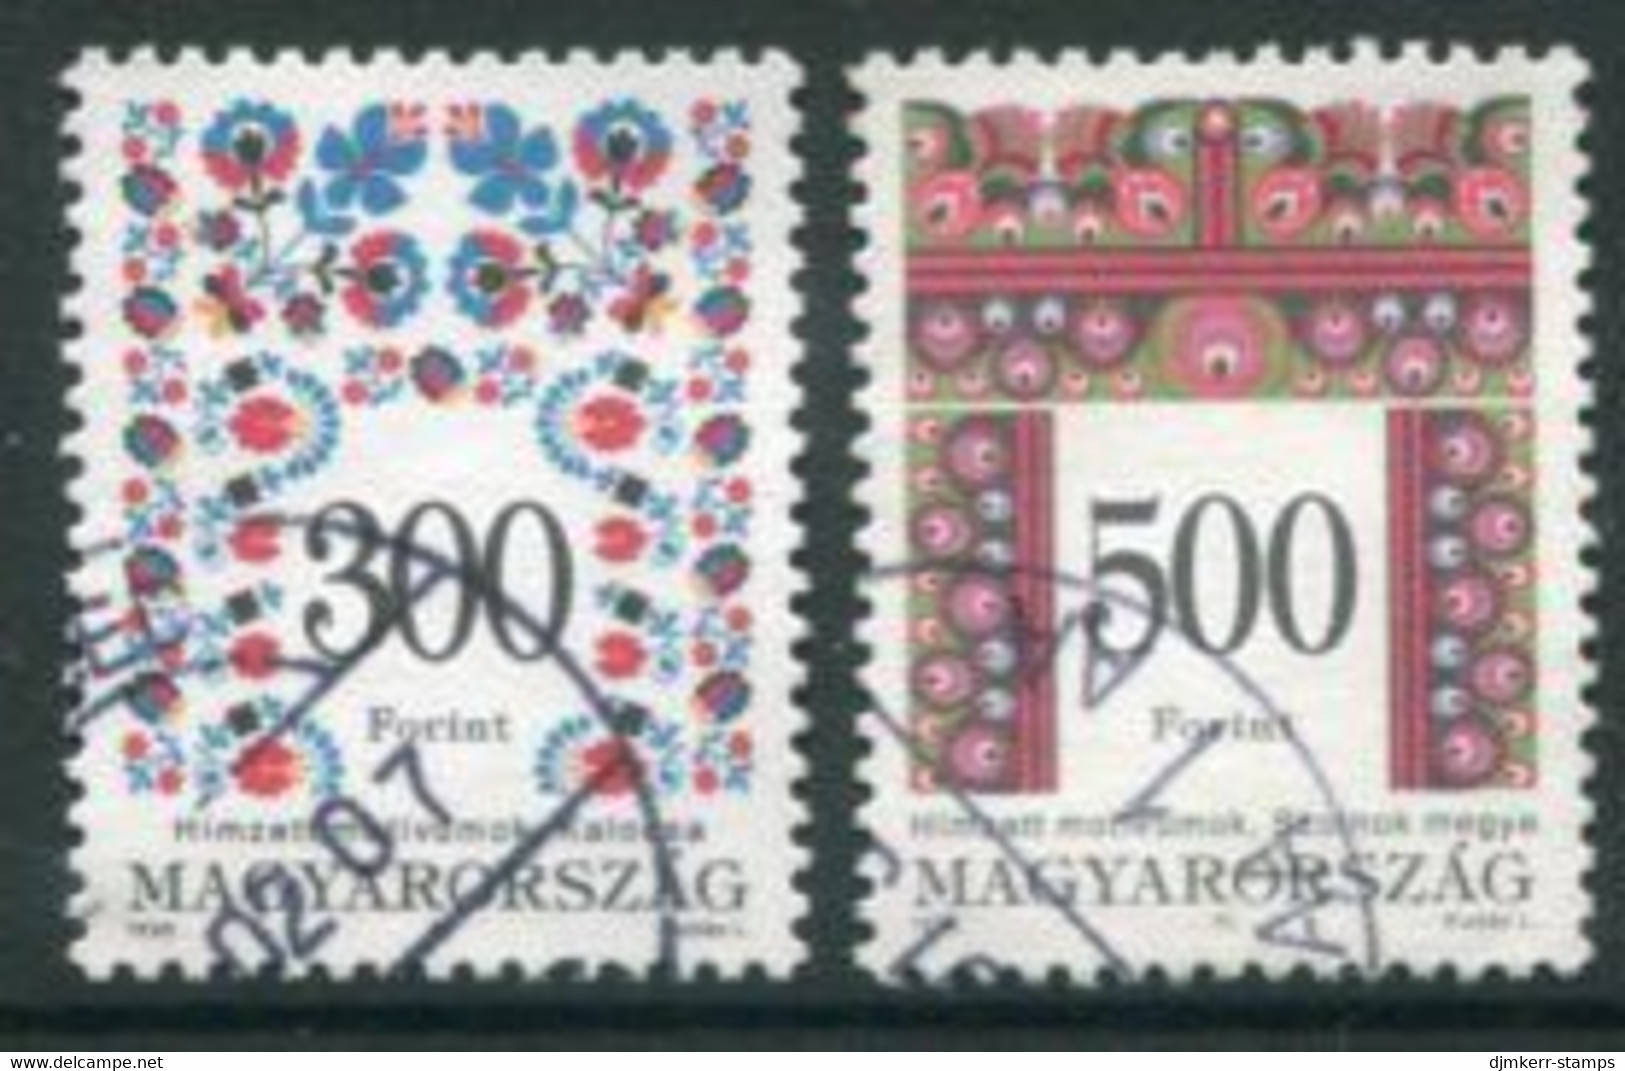 HUNGARY 1996 Folk Motif 300 And 500 Ft.  Used.  Michel 4409-10 - Gebraucht